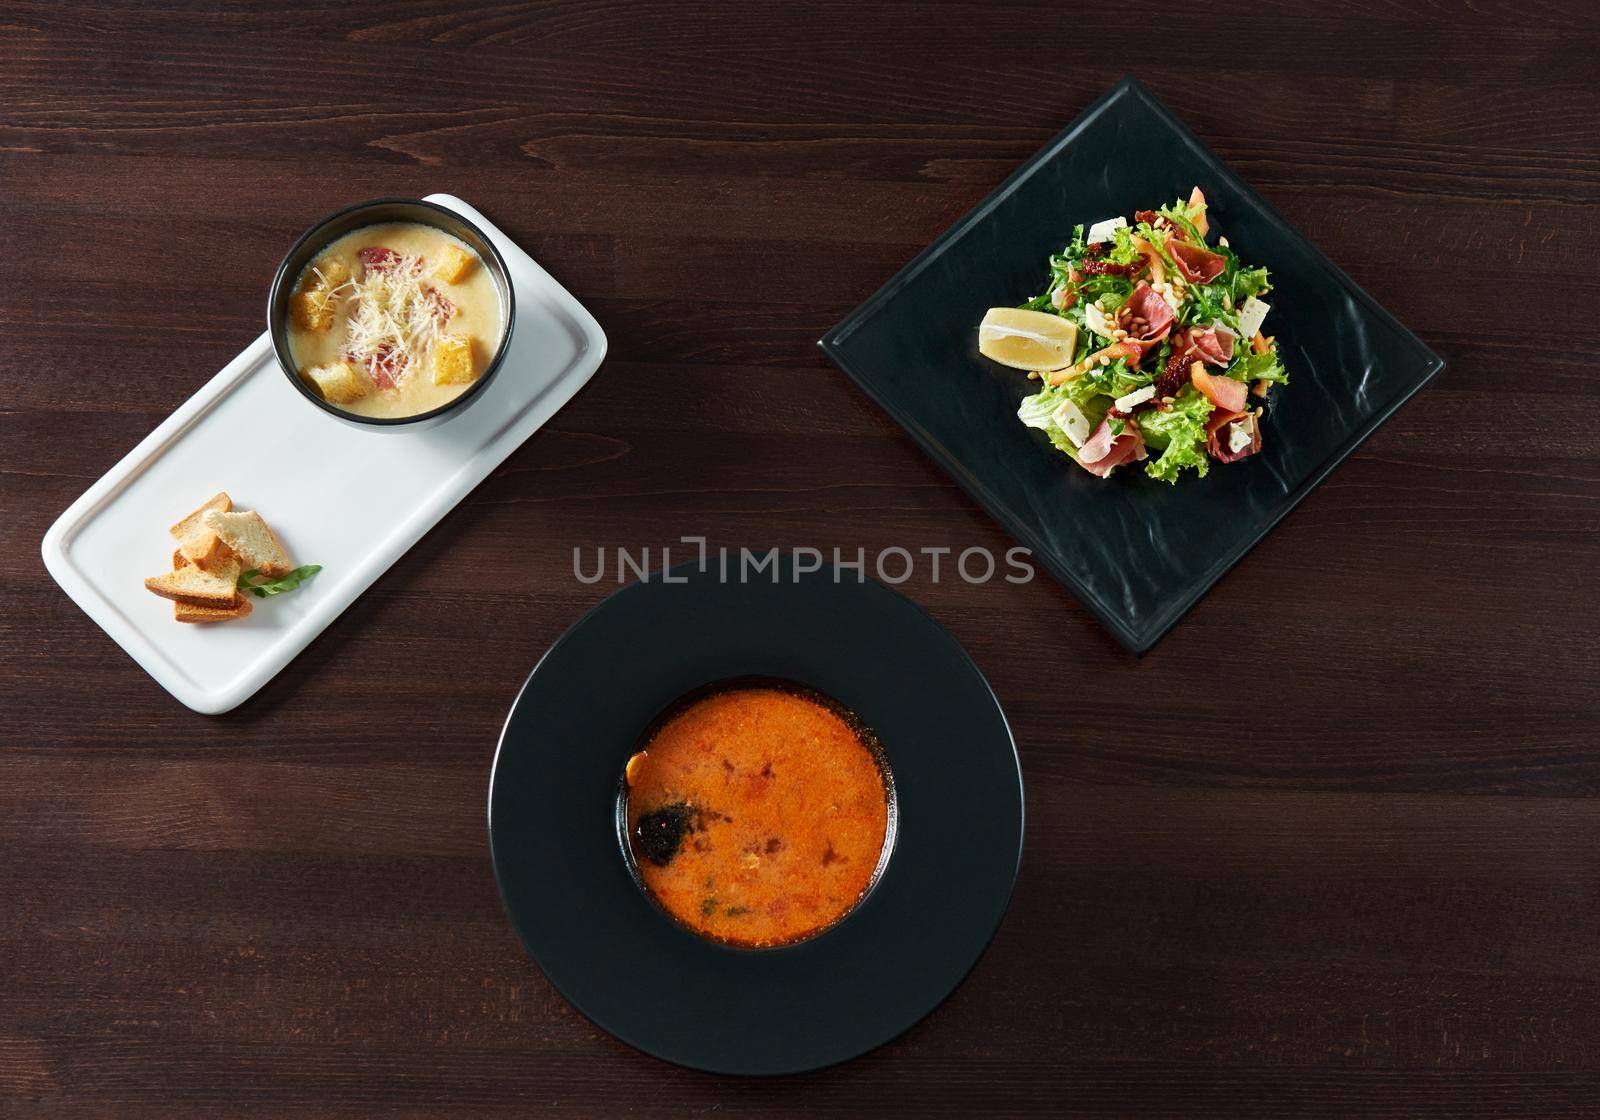 Enjoyment served. Top view of a gazpacho cold Spanish soup served with cheese cream soup with croutons and a plate of salad with arugula and prosciutto